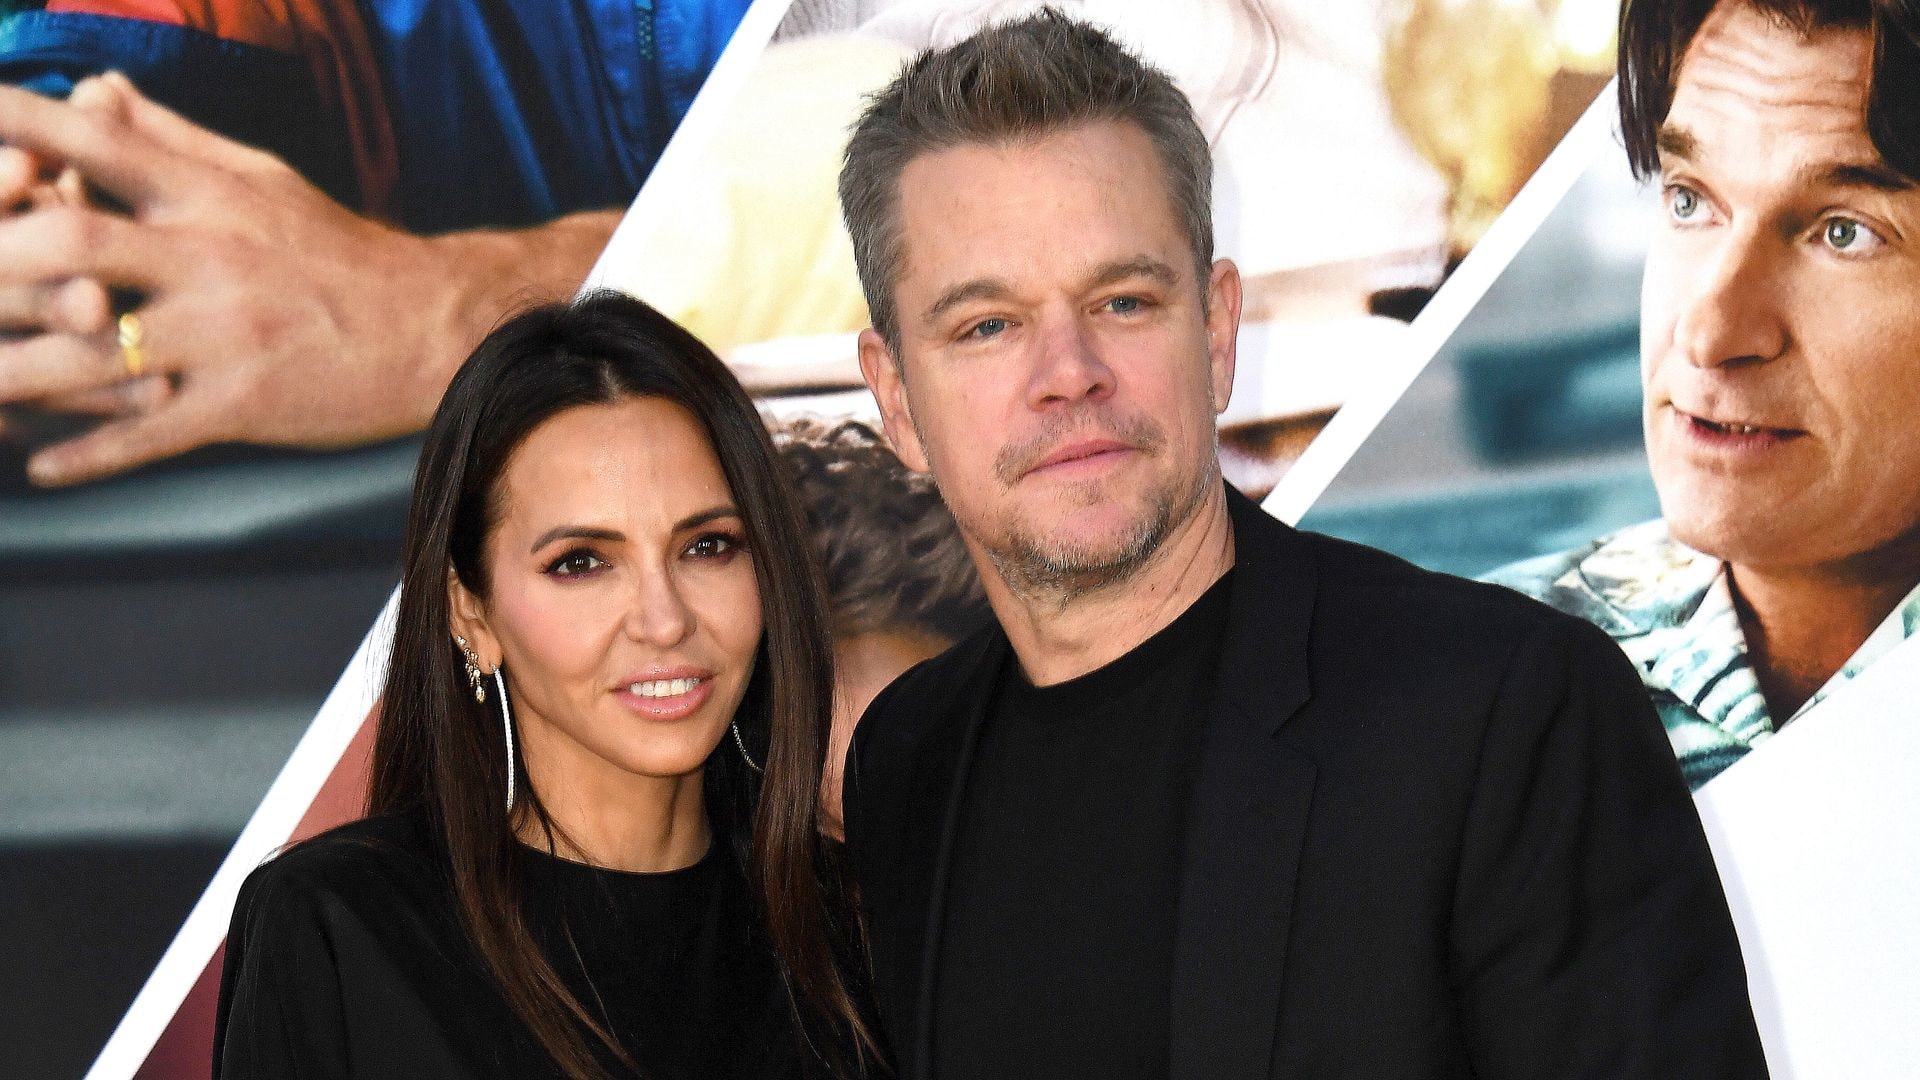 Matt Damon's four rarely-seen daughters and blended family with wife Luciana Barroso – see photos